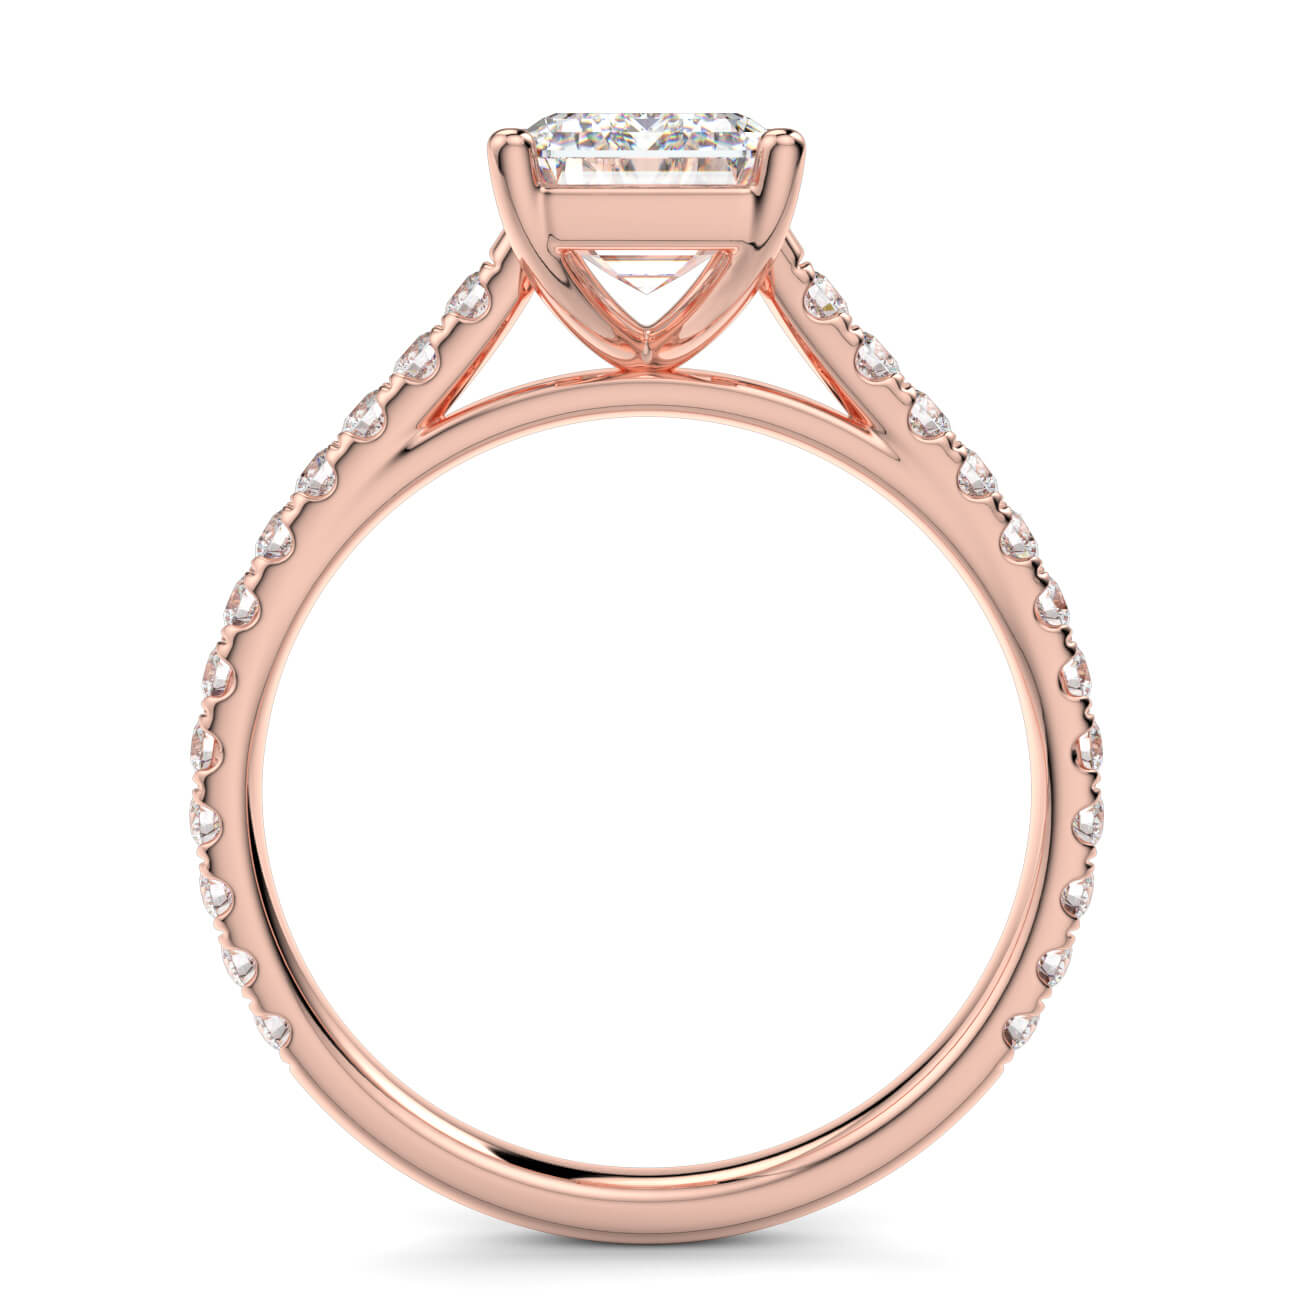 Emerald Cut diamond cathedral engagement ring in rose gold – Australian Diamond Network